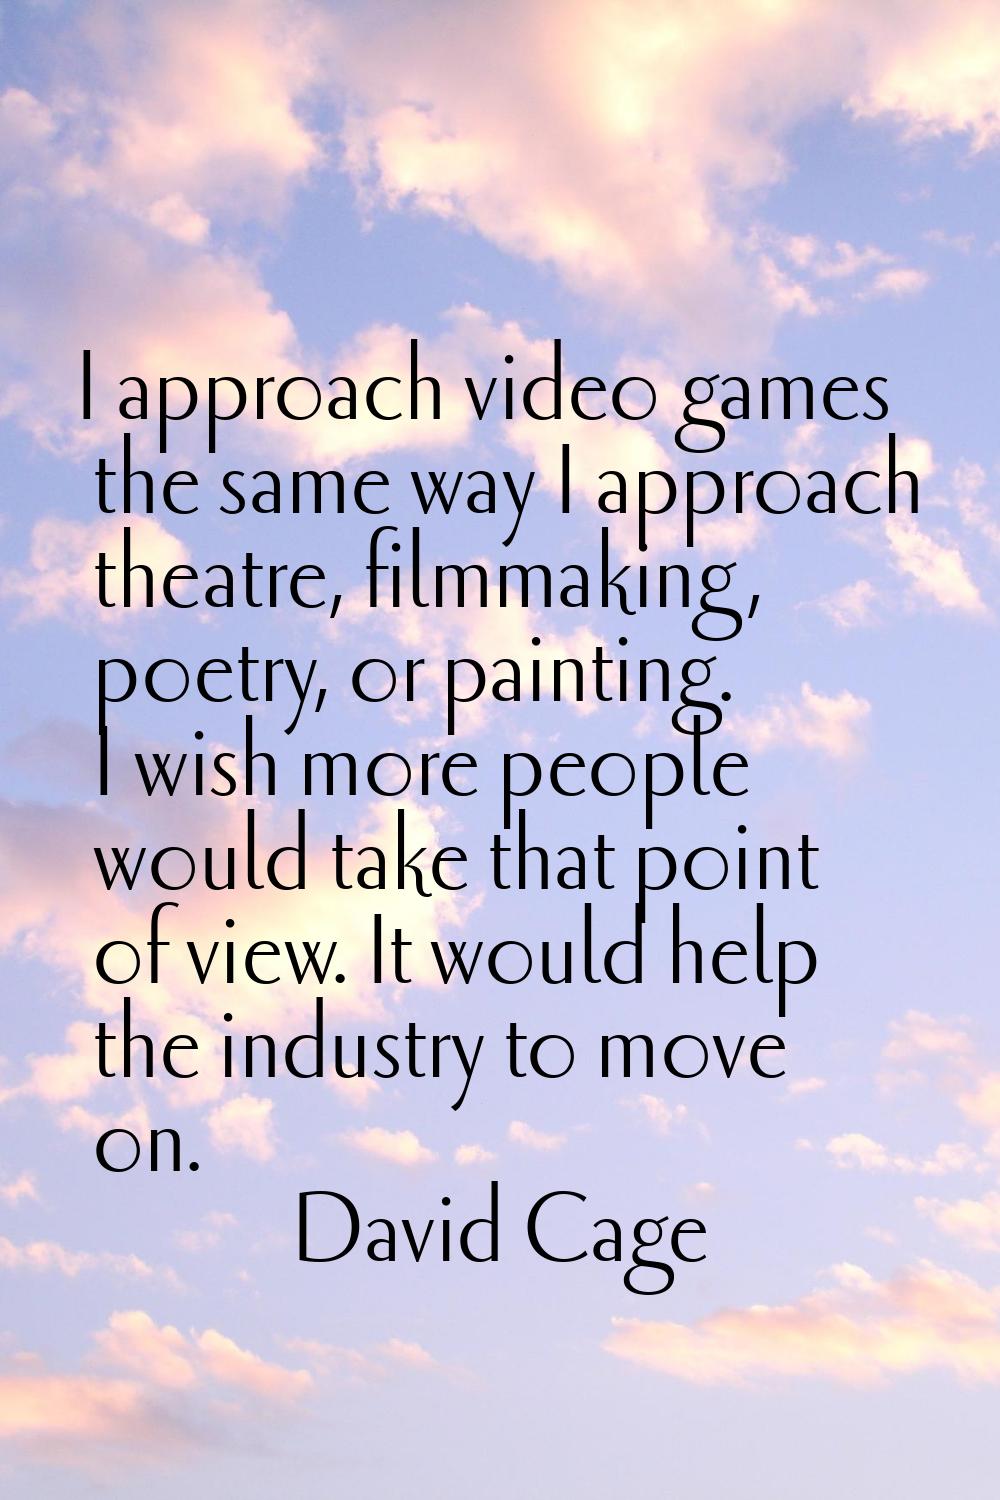 I approach video games the same way I approach theatre, filmmaking, poetry, or painting. I wish mor